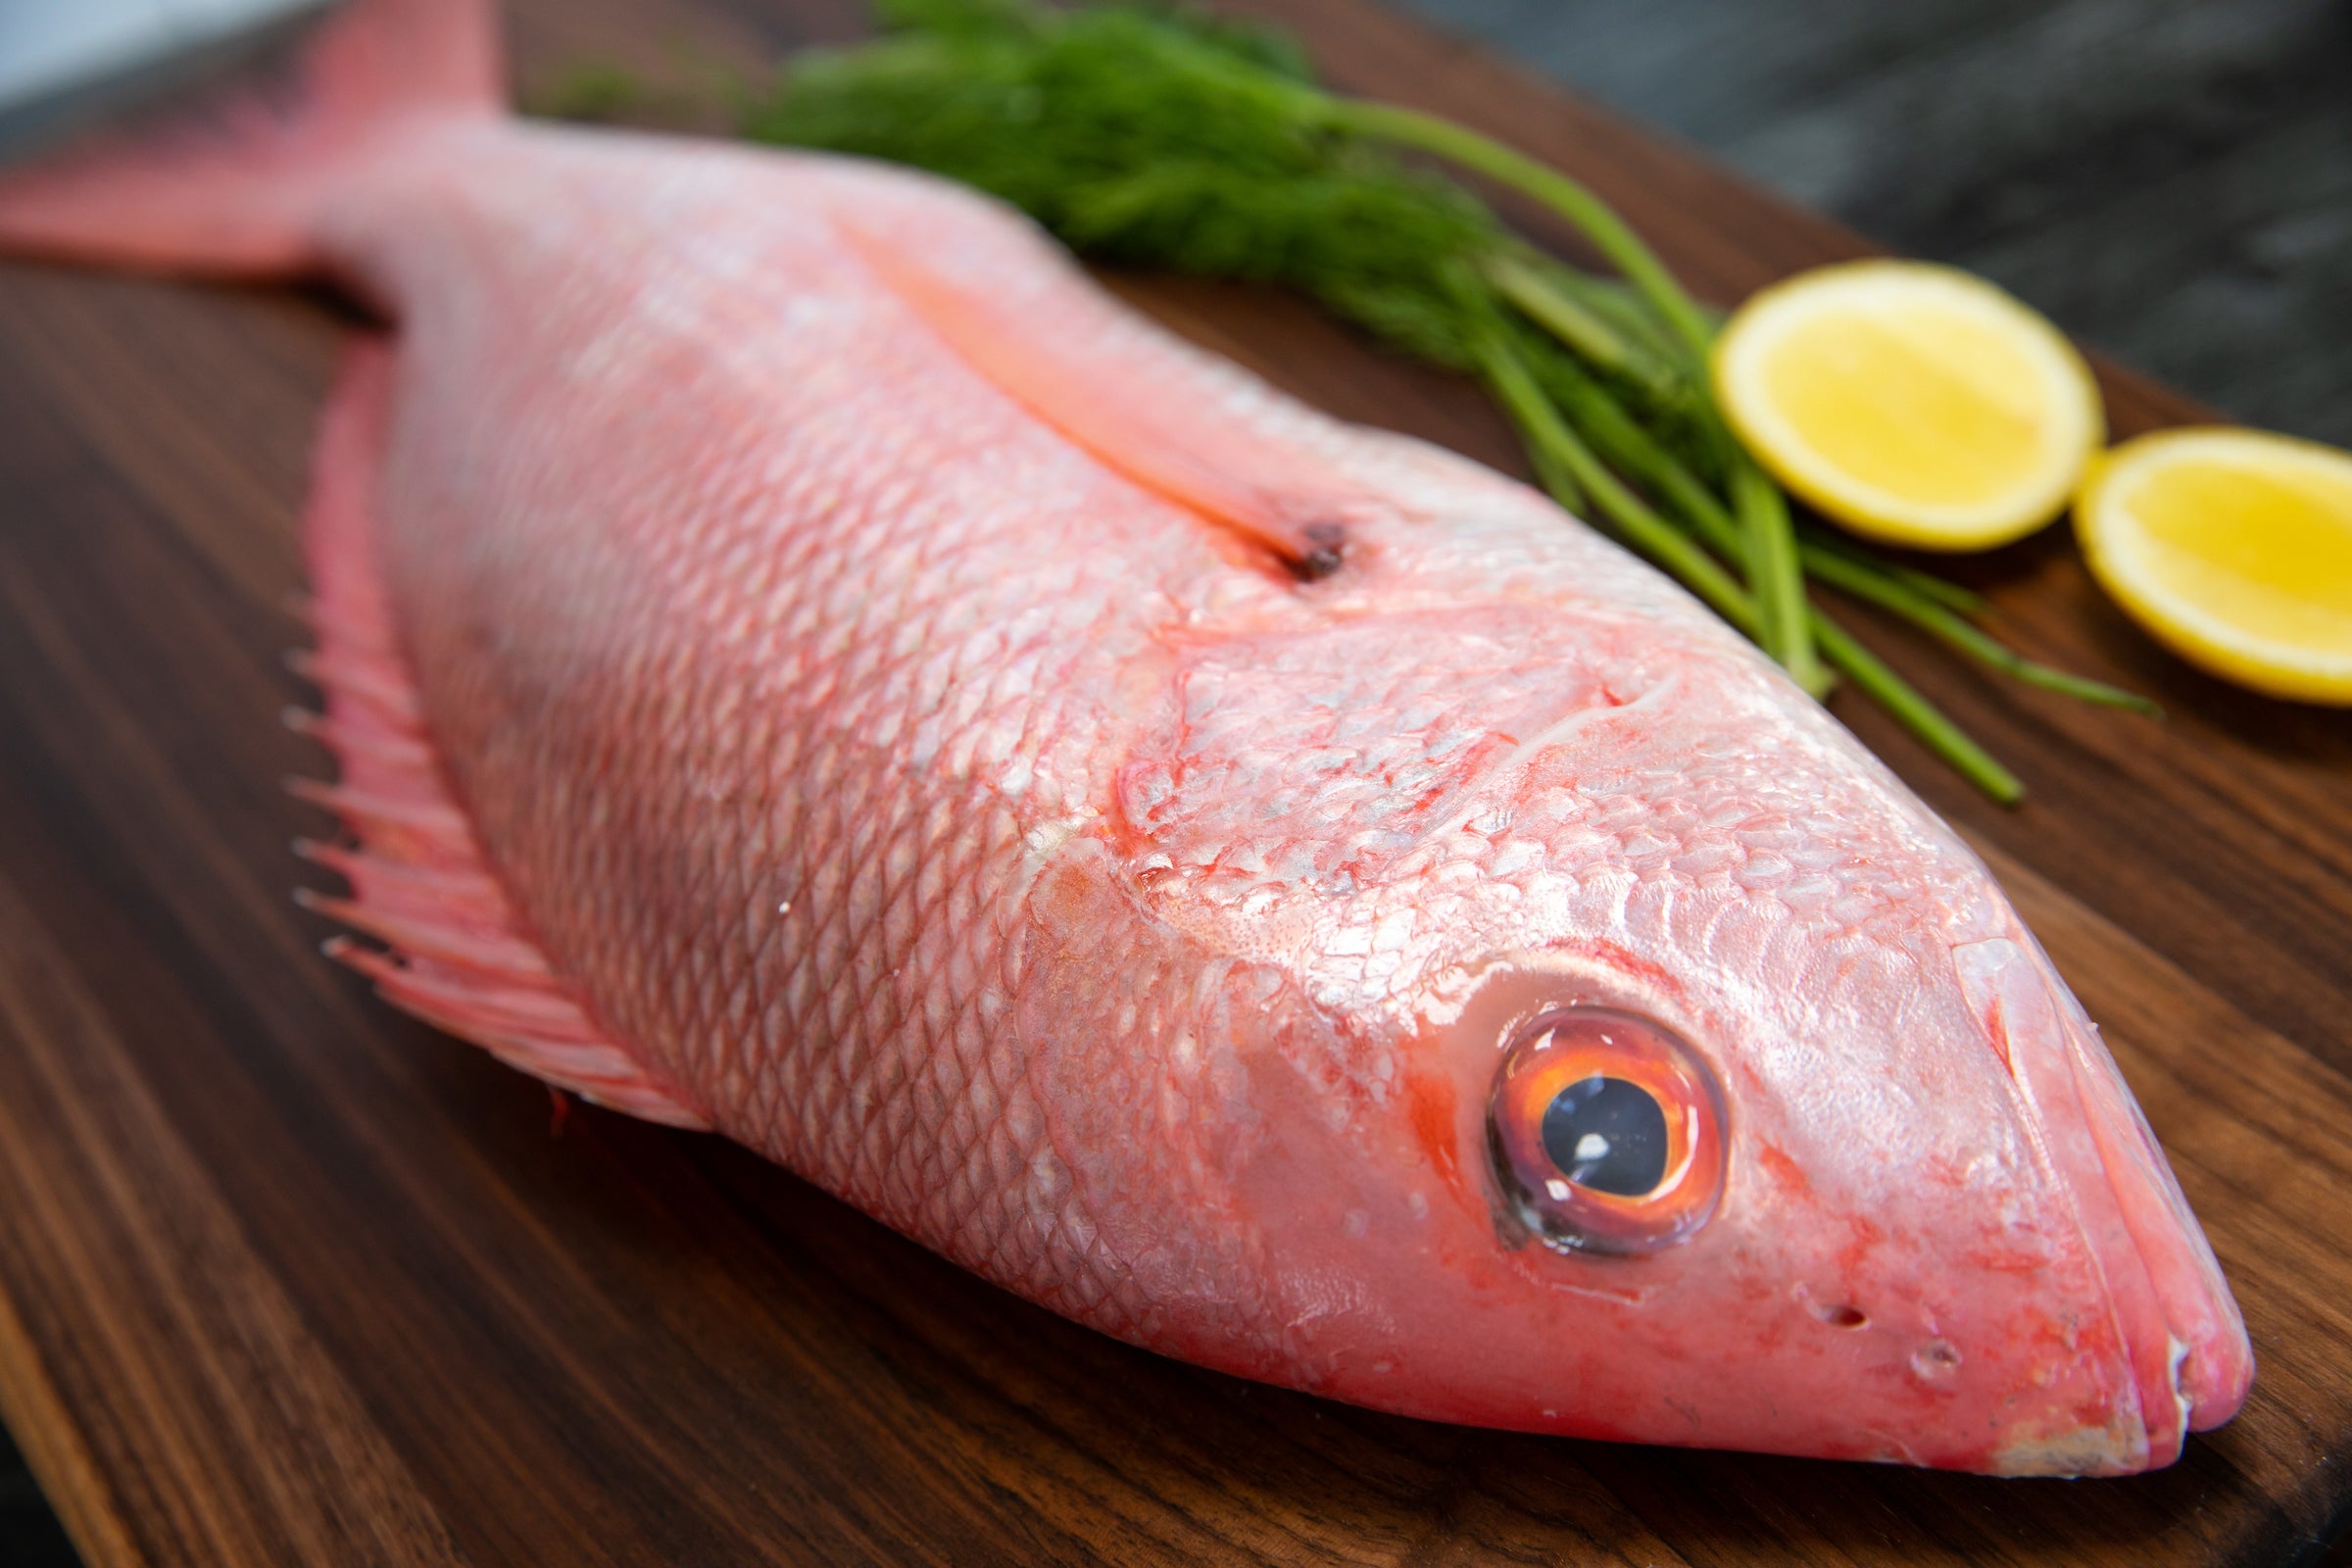 Whole Snapper - Buy Whole Snapper Online - Local 130 Seafood NJHome Delivery